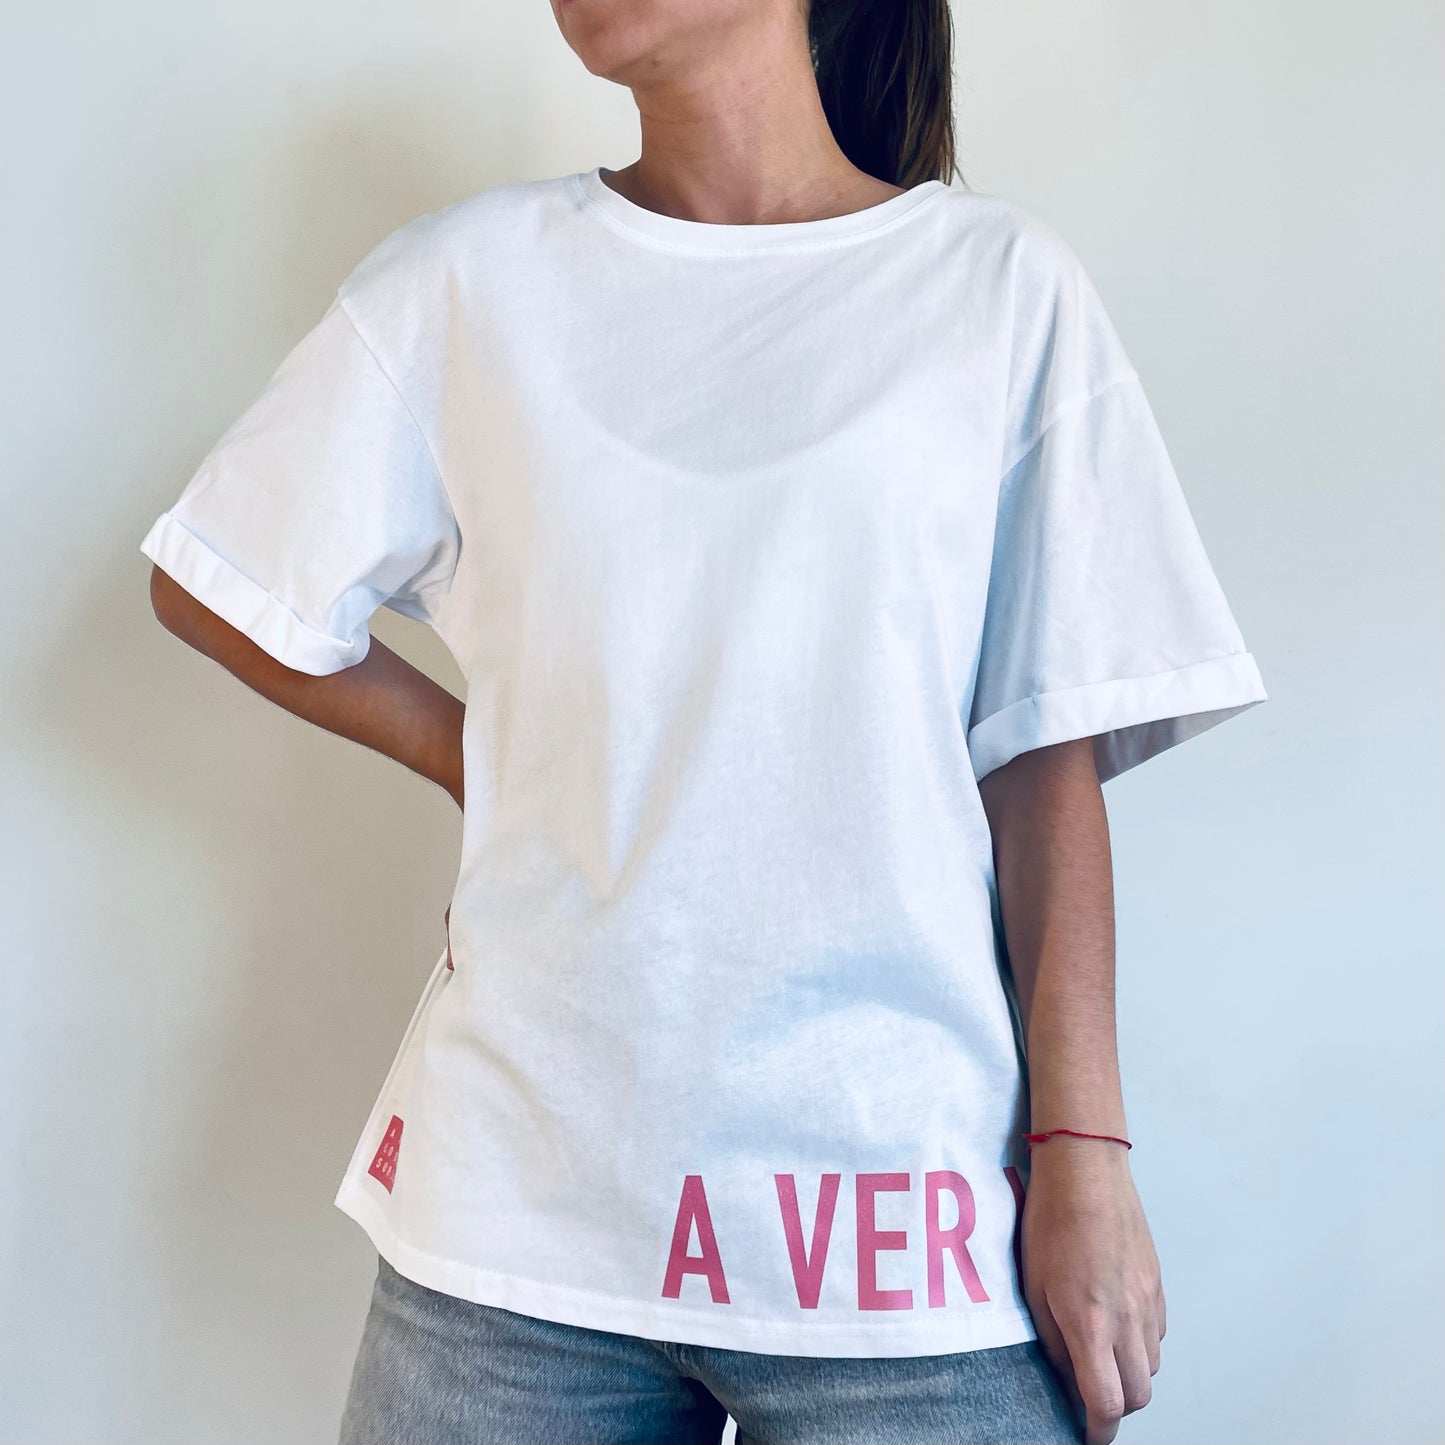 A VER LO QUE SURJA Girls Short sleeve t-shirt one size oversize